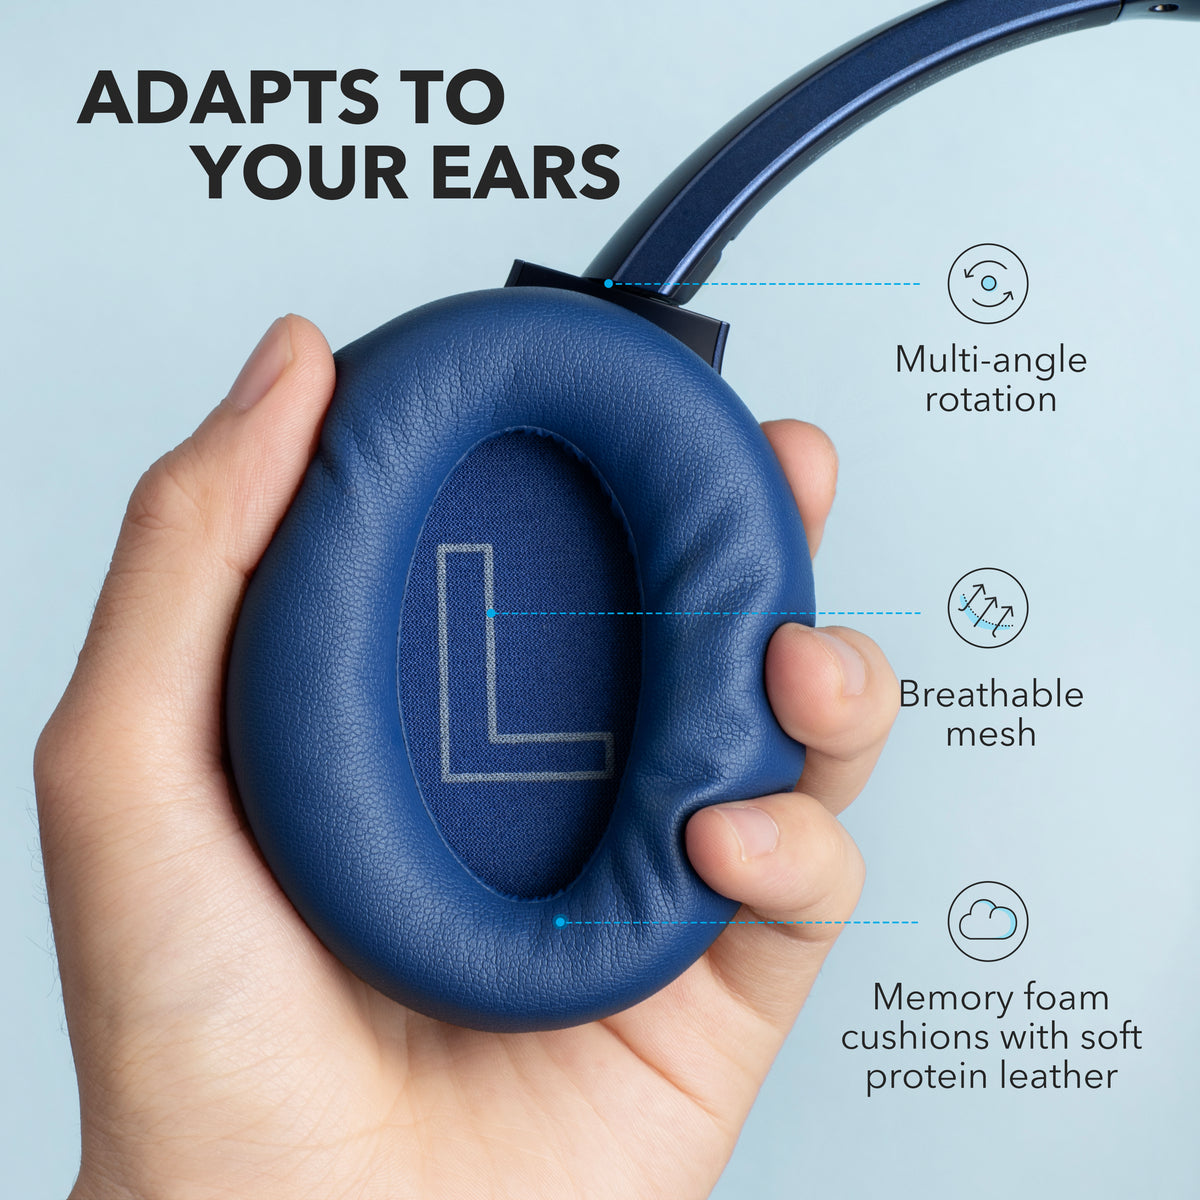 Active Noise Cancellation Software